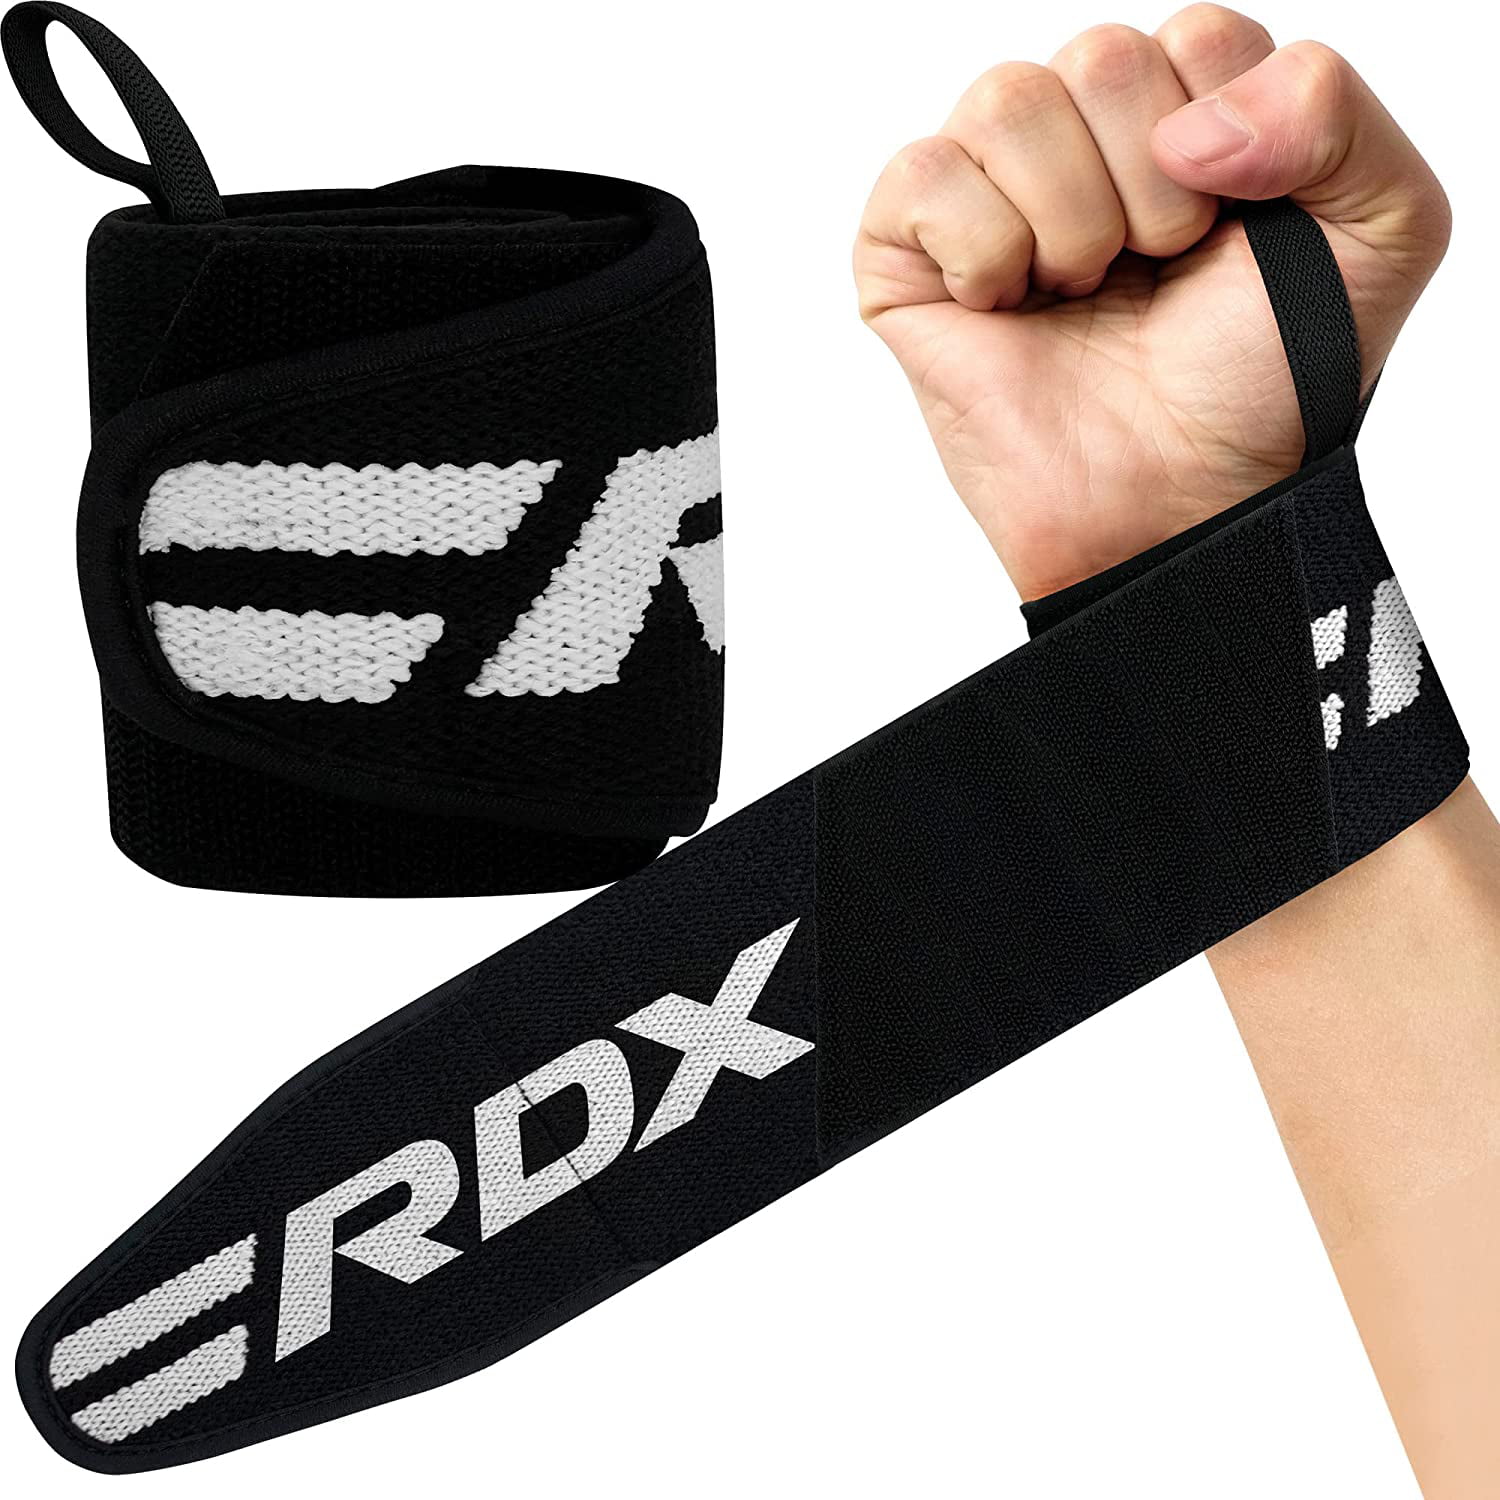 WEIGHT LIFTING GYM TRAINING WRIST SUPPORT STRAPS WRAPS BODYBUILDING 